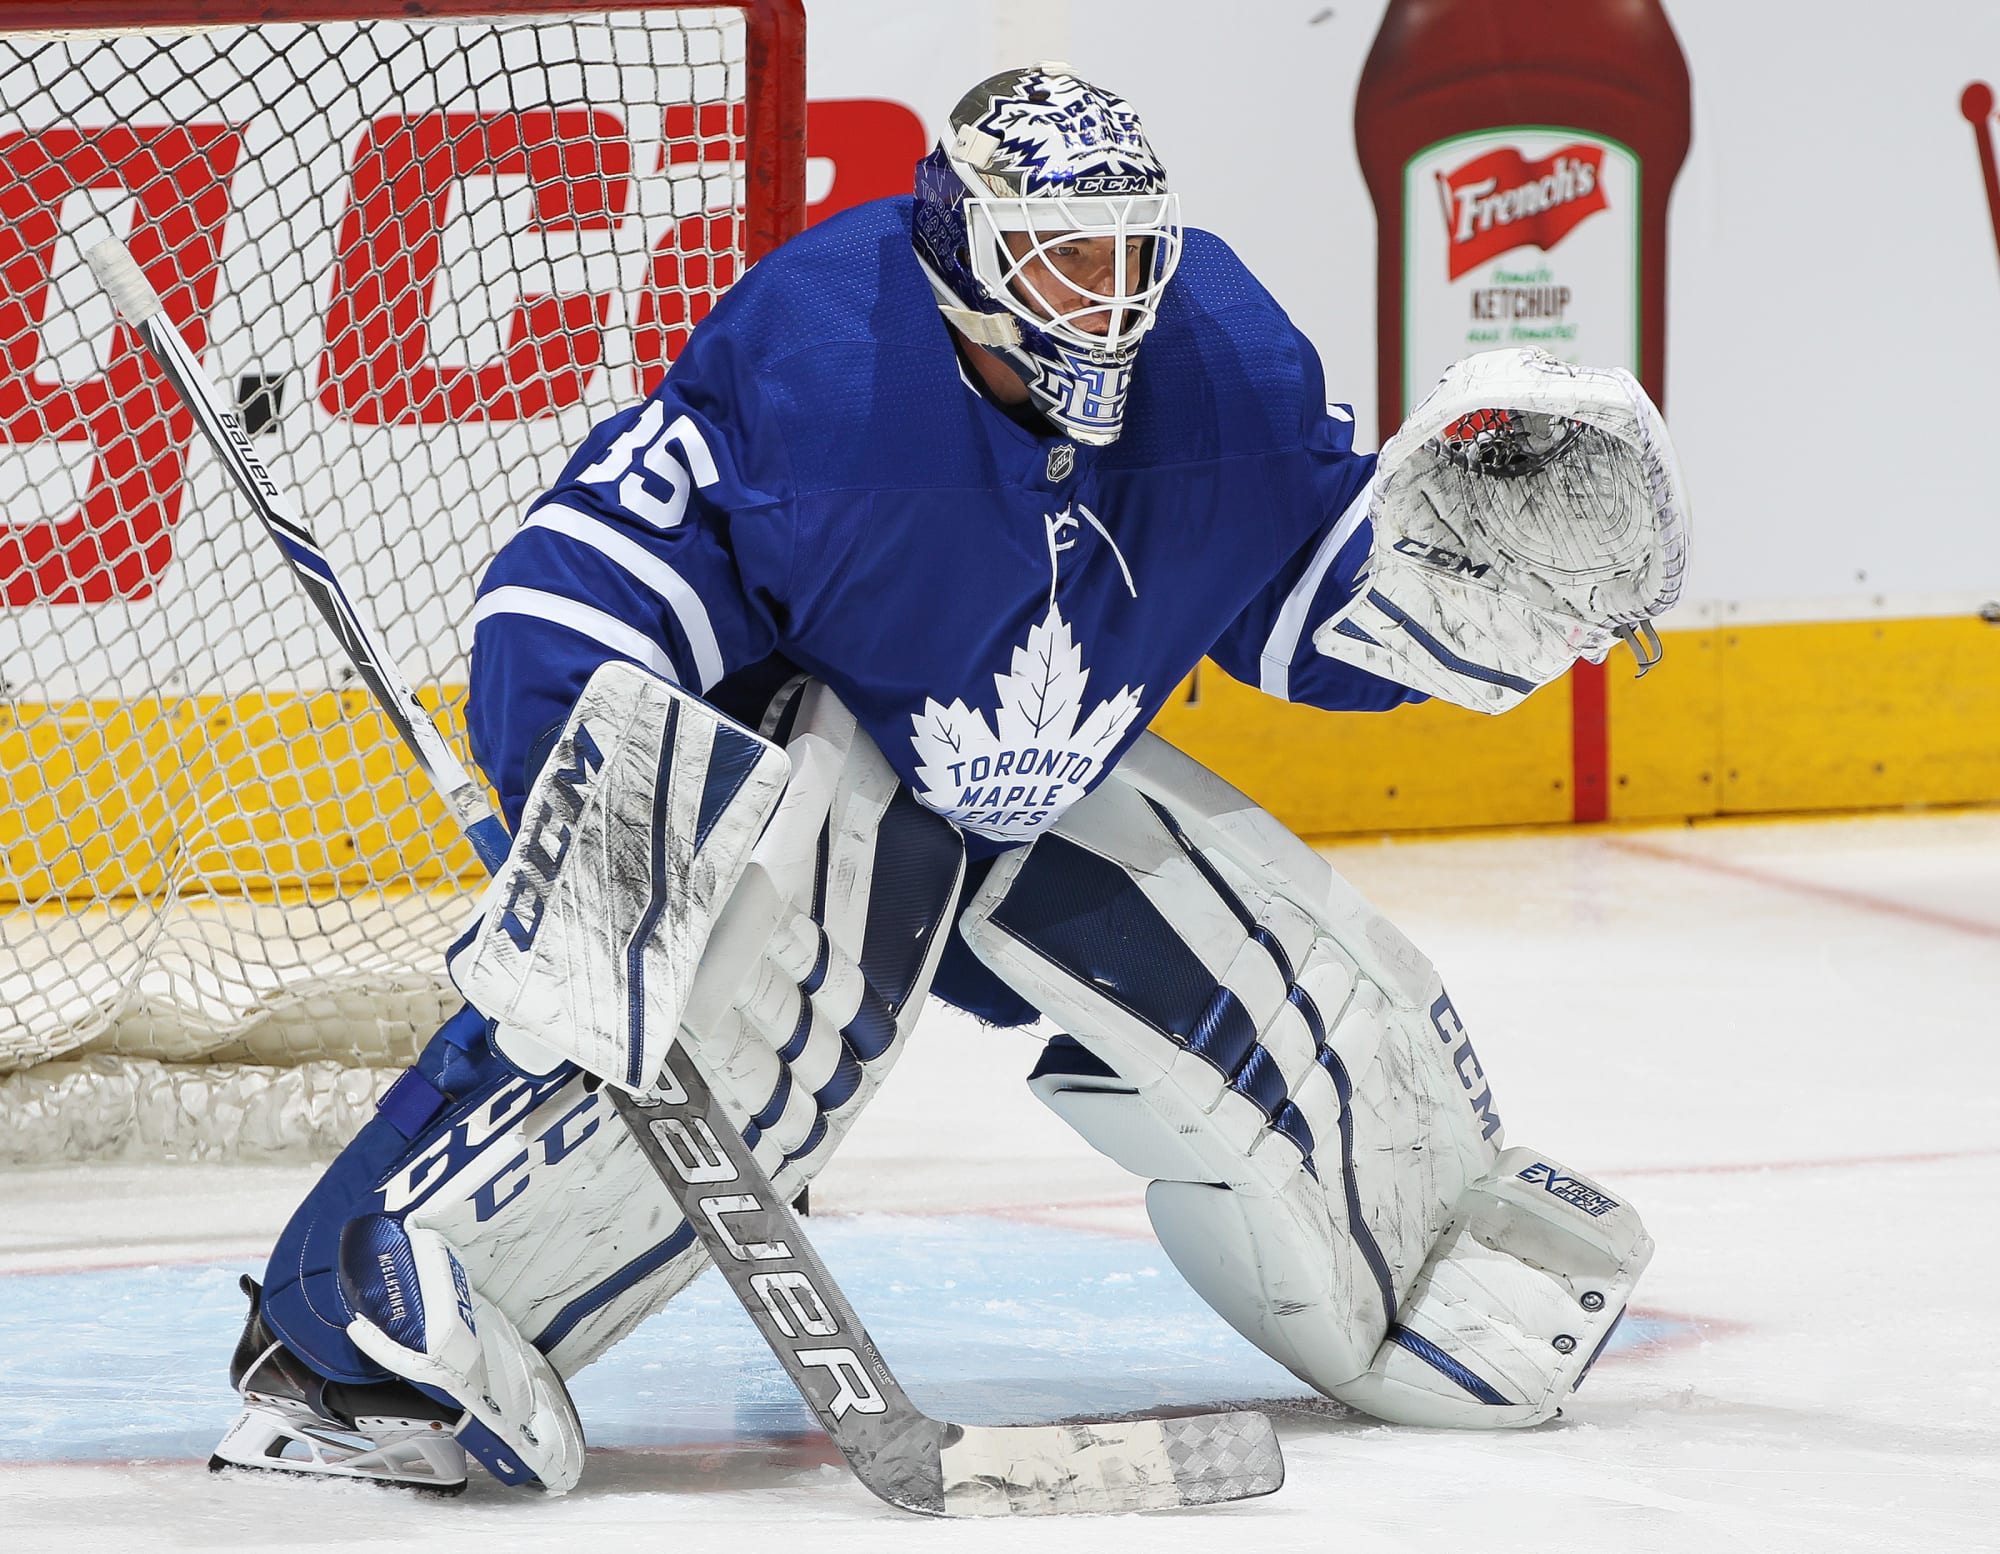 Hurricanes, Flyers pounce on waived Maple Leafs goalies McElhinney, Pickard